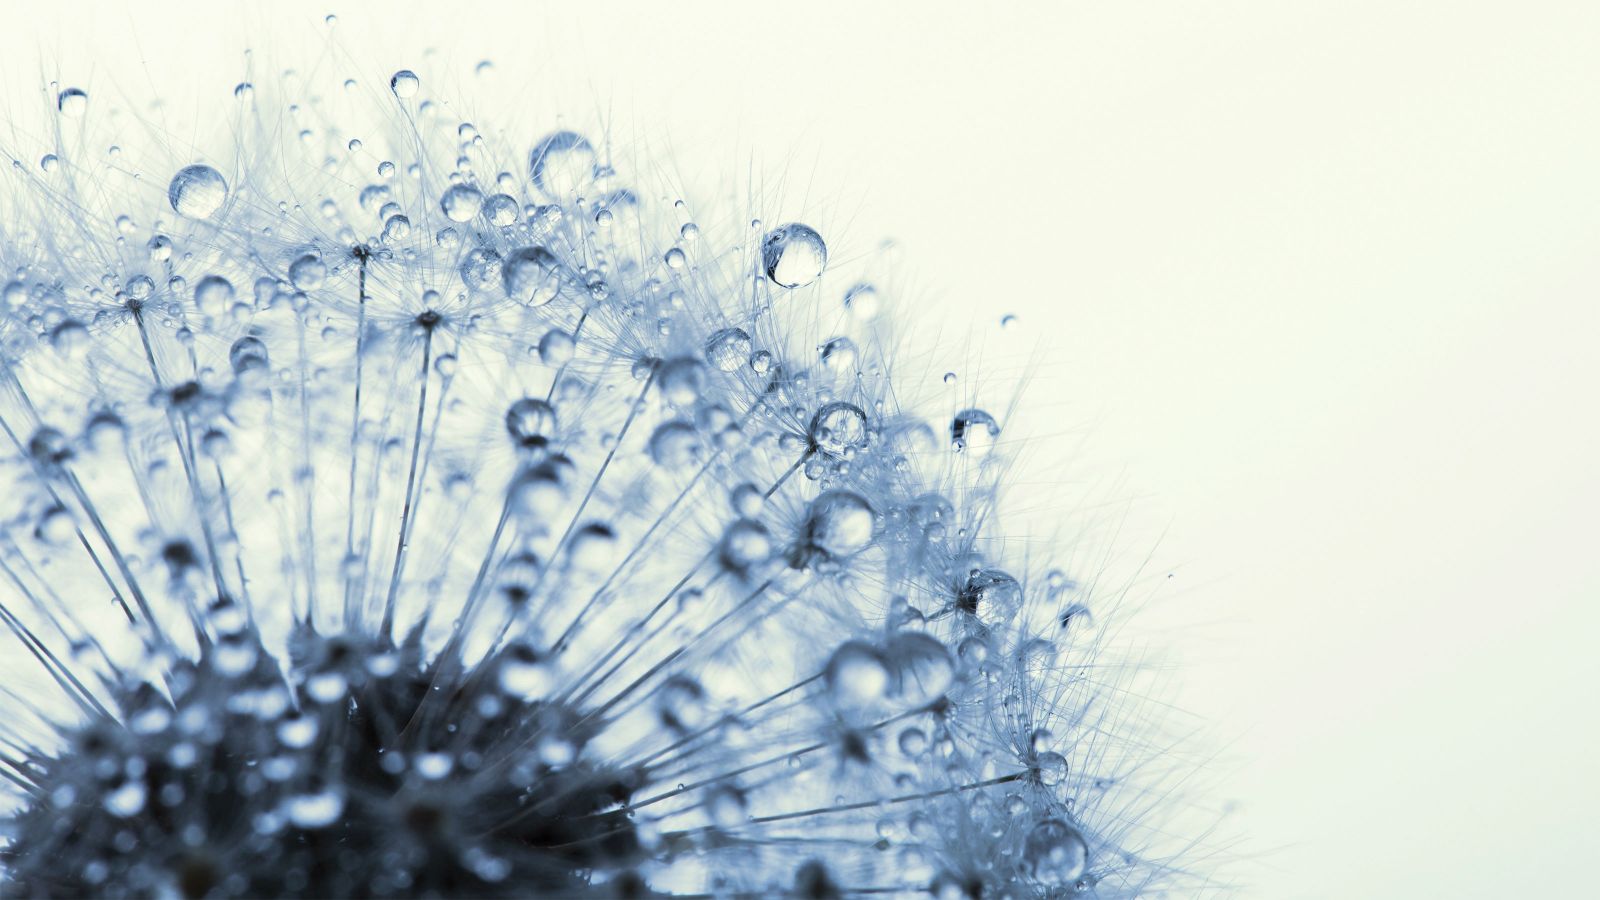 A close up look of a dandelion with seeds about to take flight and are covered in morning dew – set against an off white background.